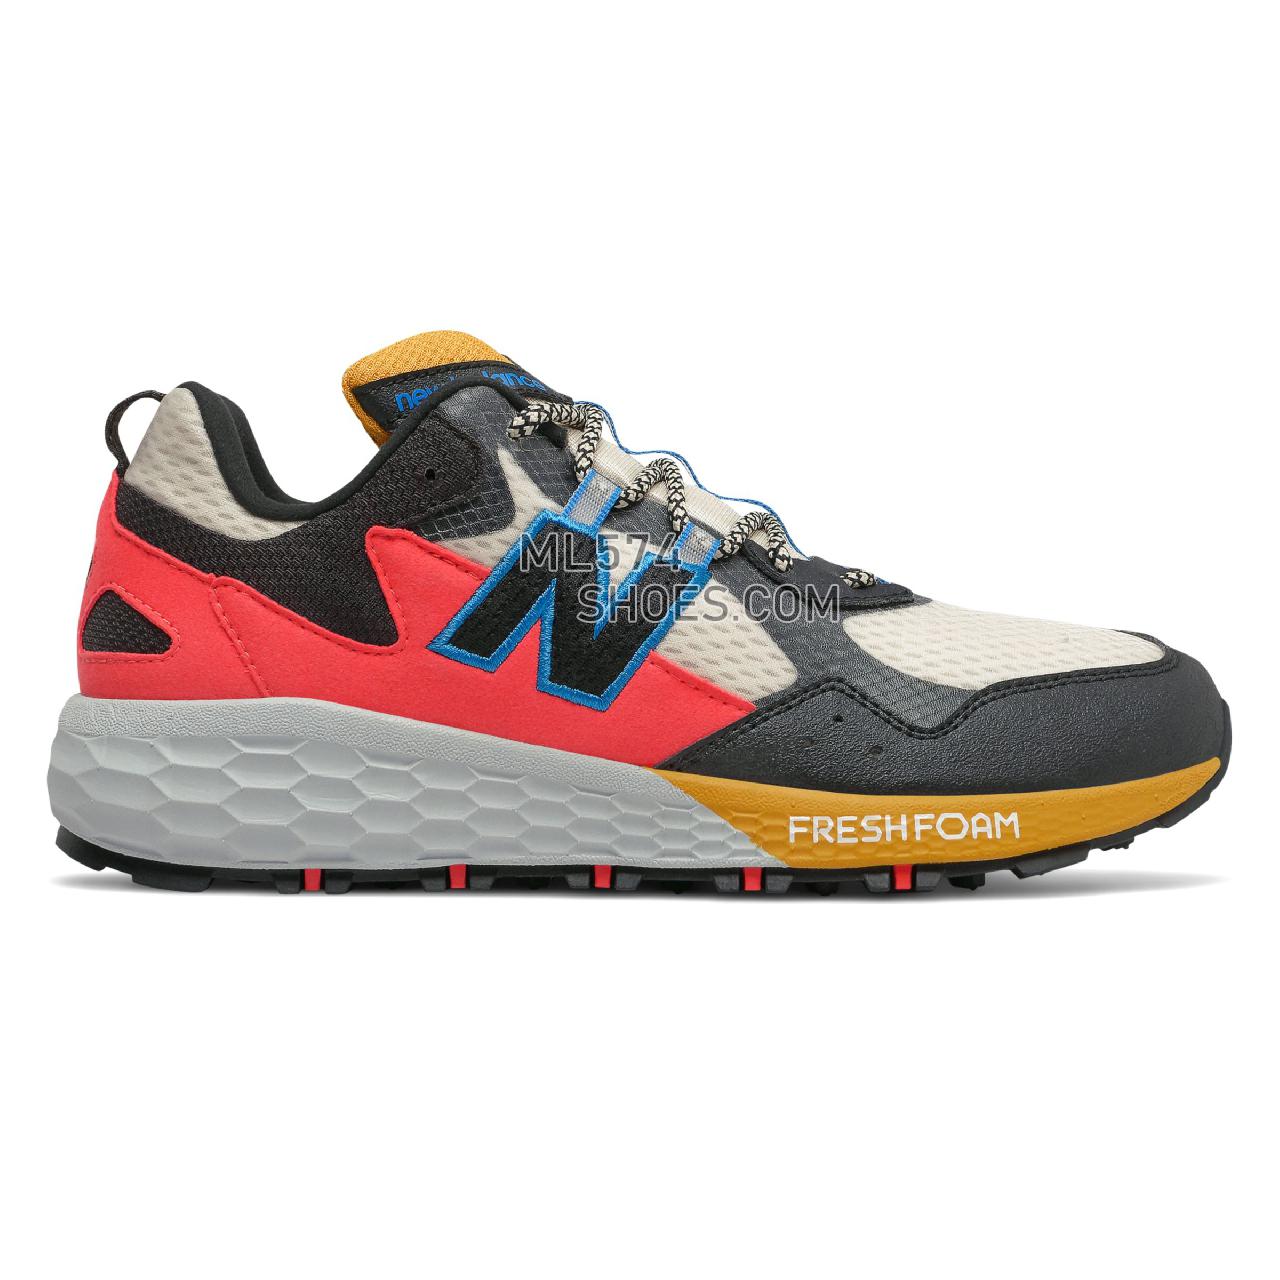 New Balance Fresh Foam Crag v2 - Women's Trail Running - Stone with Black and Neo Classic Blue - WTCRGLS2